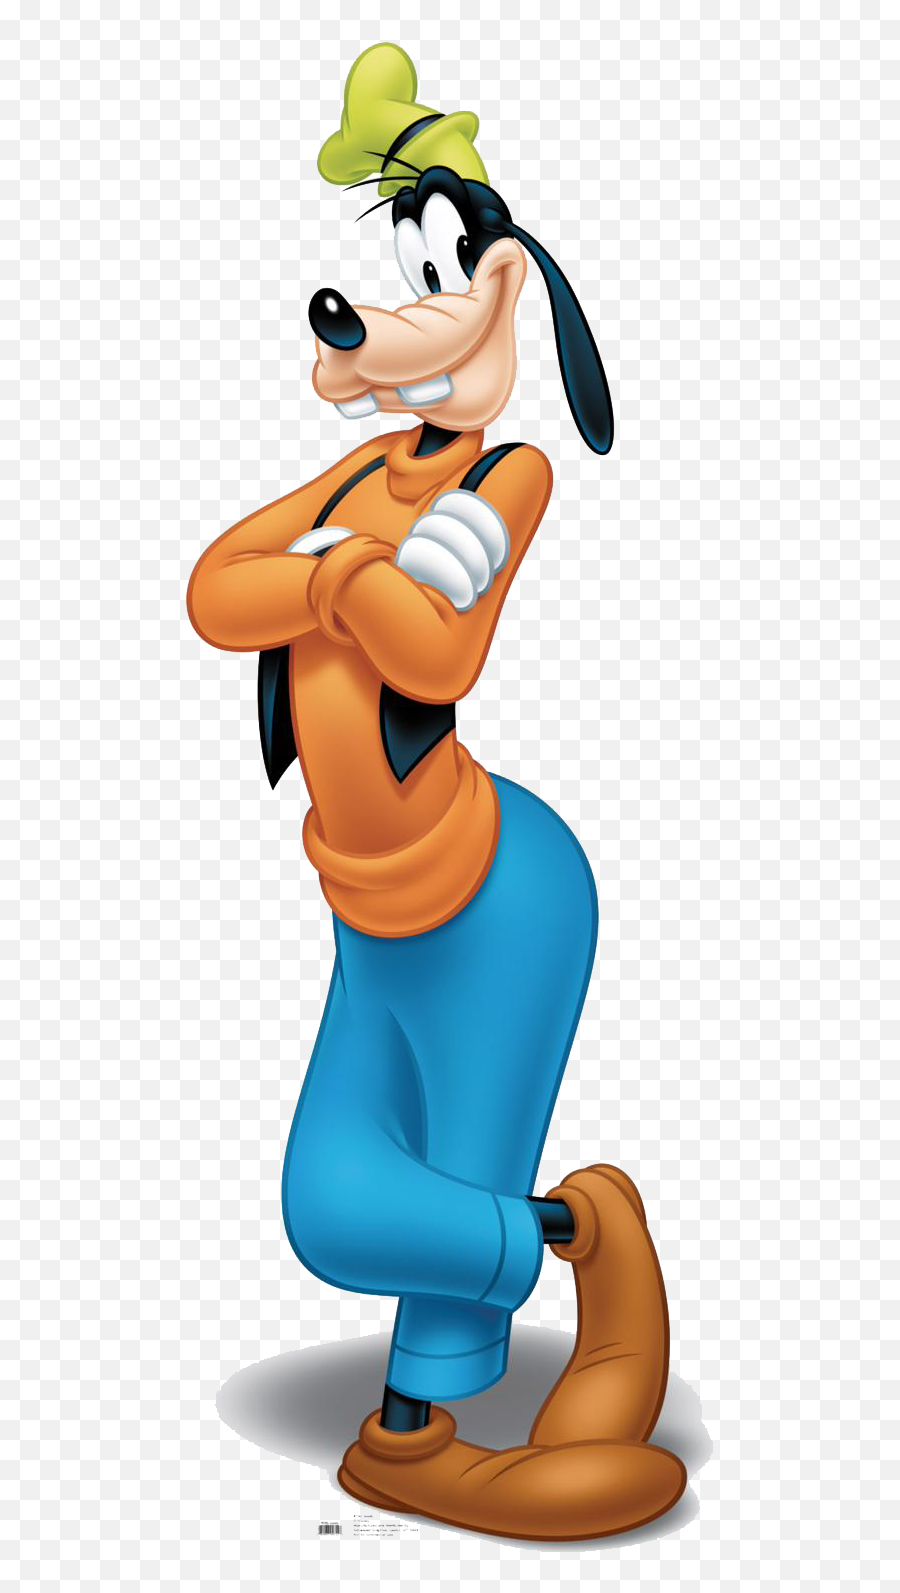 Goofy Png Transparent Images - Goofy From Mickey Mouse,Goofy Transparent